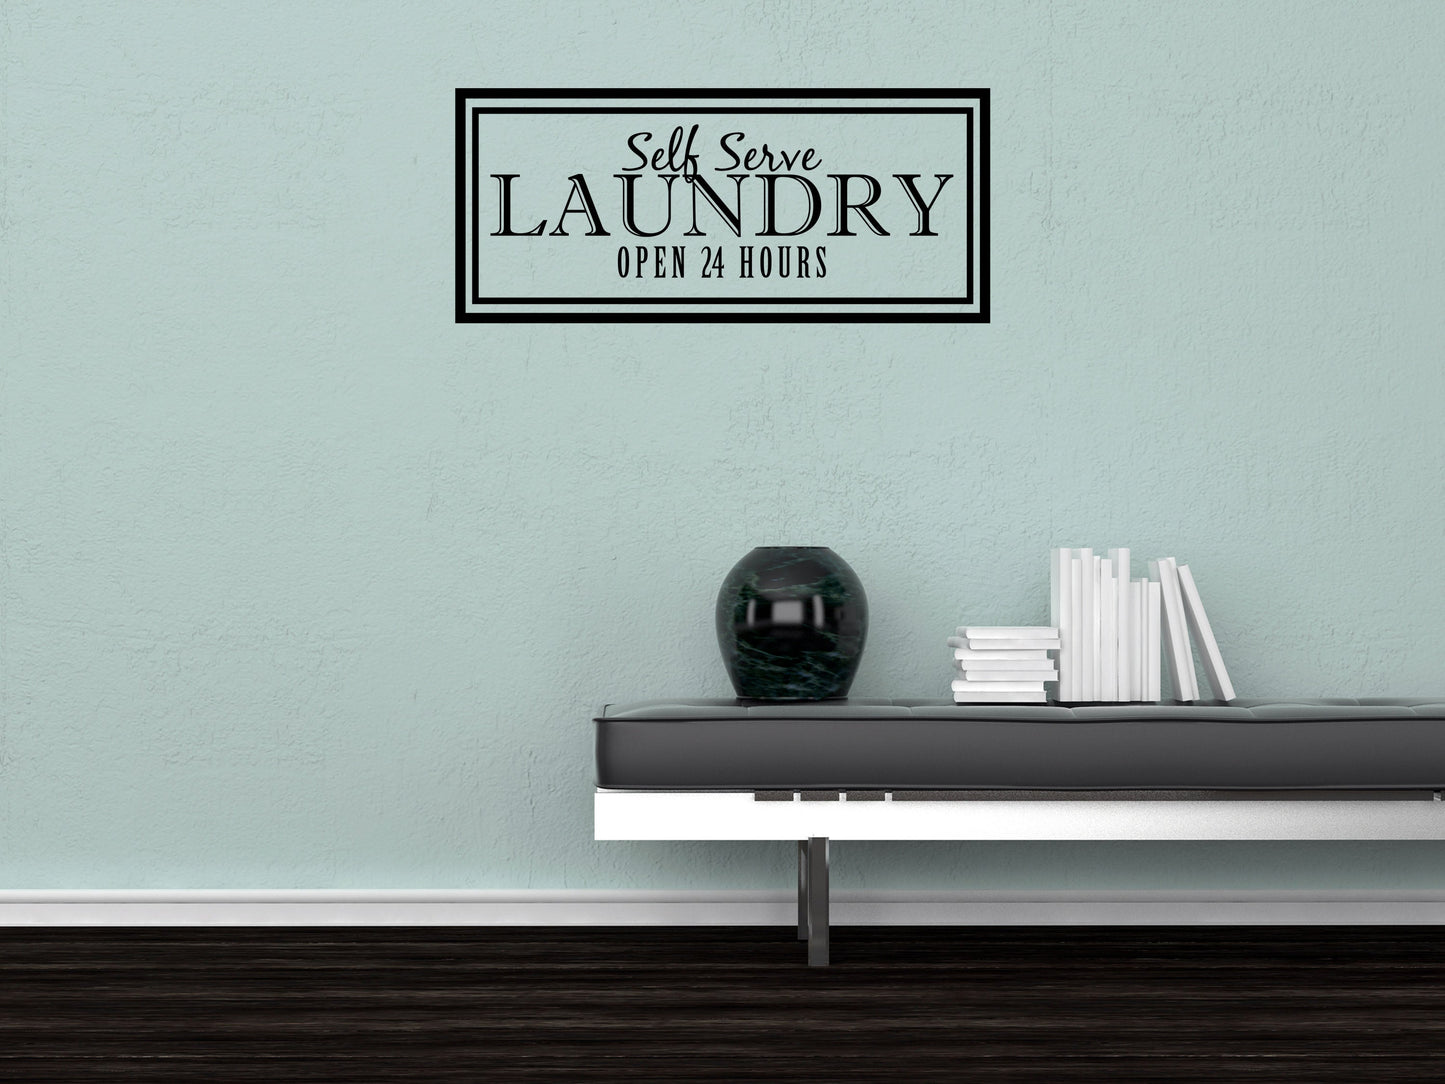 Laundry Decal Sign - Laundry Wall Sticker - Laundry Room Décor - Laundry Wall Art Décor Vinyl Wall Decal Inspirational Wall Signs 